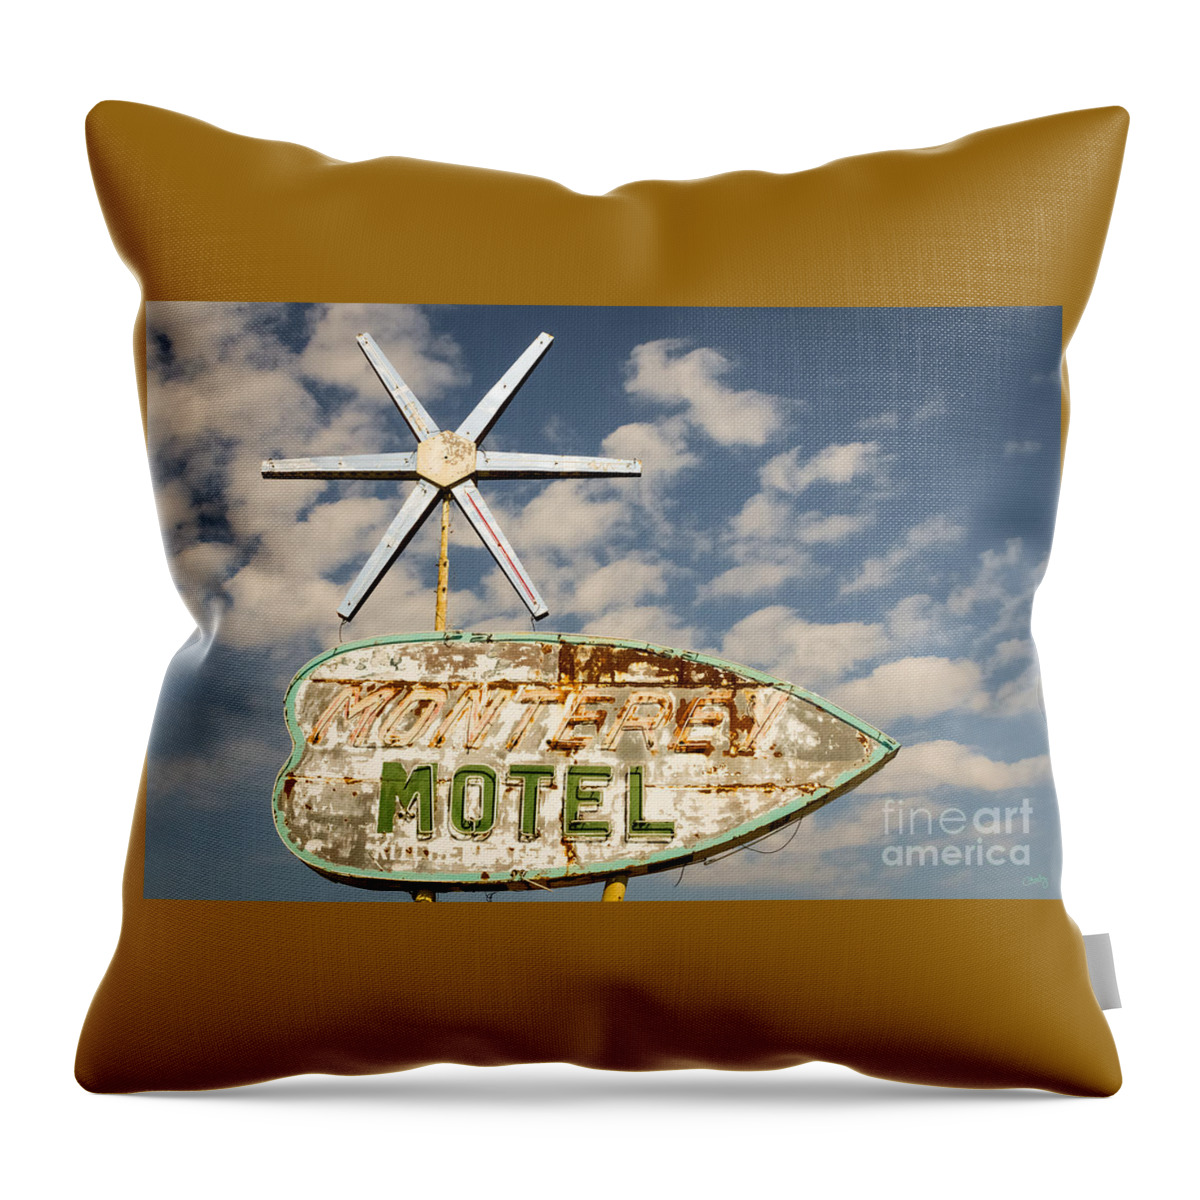 Vintage Monterey Motel Throw Pillow featuring the photograph Vintage Monterey Motel Neon Sign by Imagery by Charly